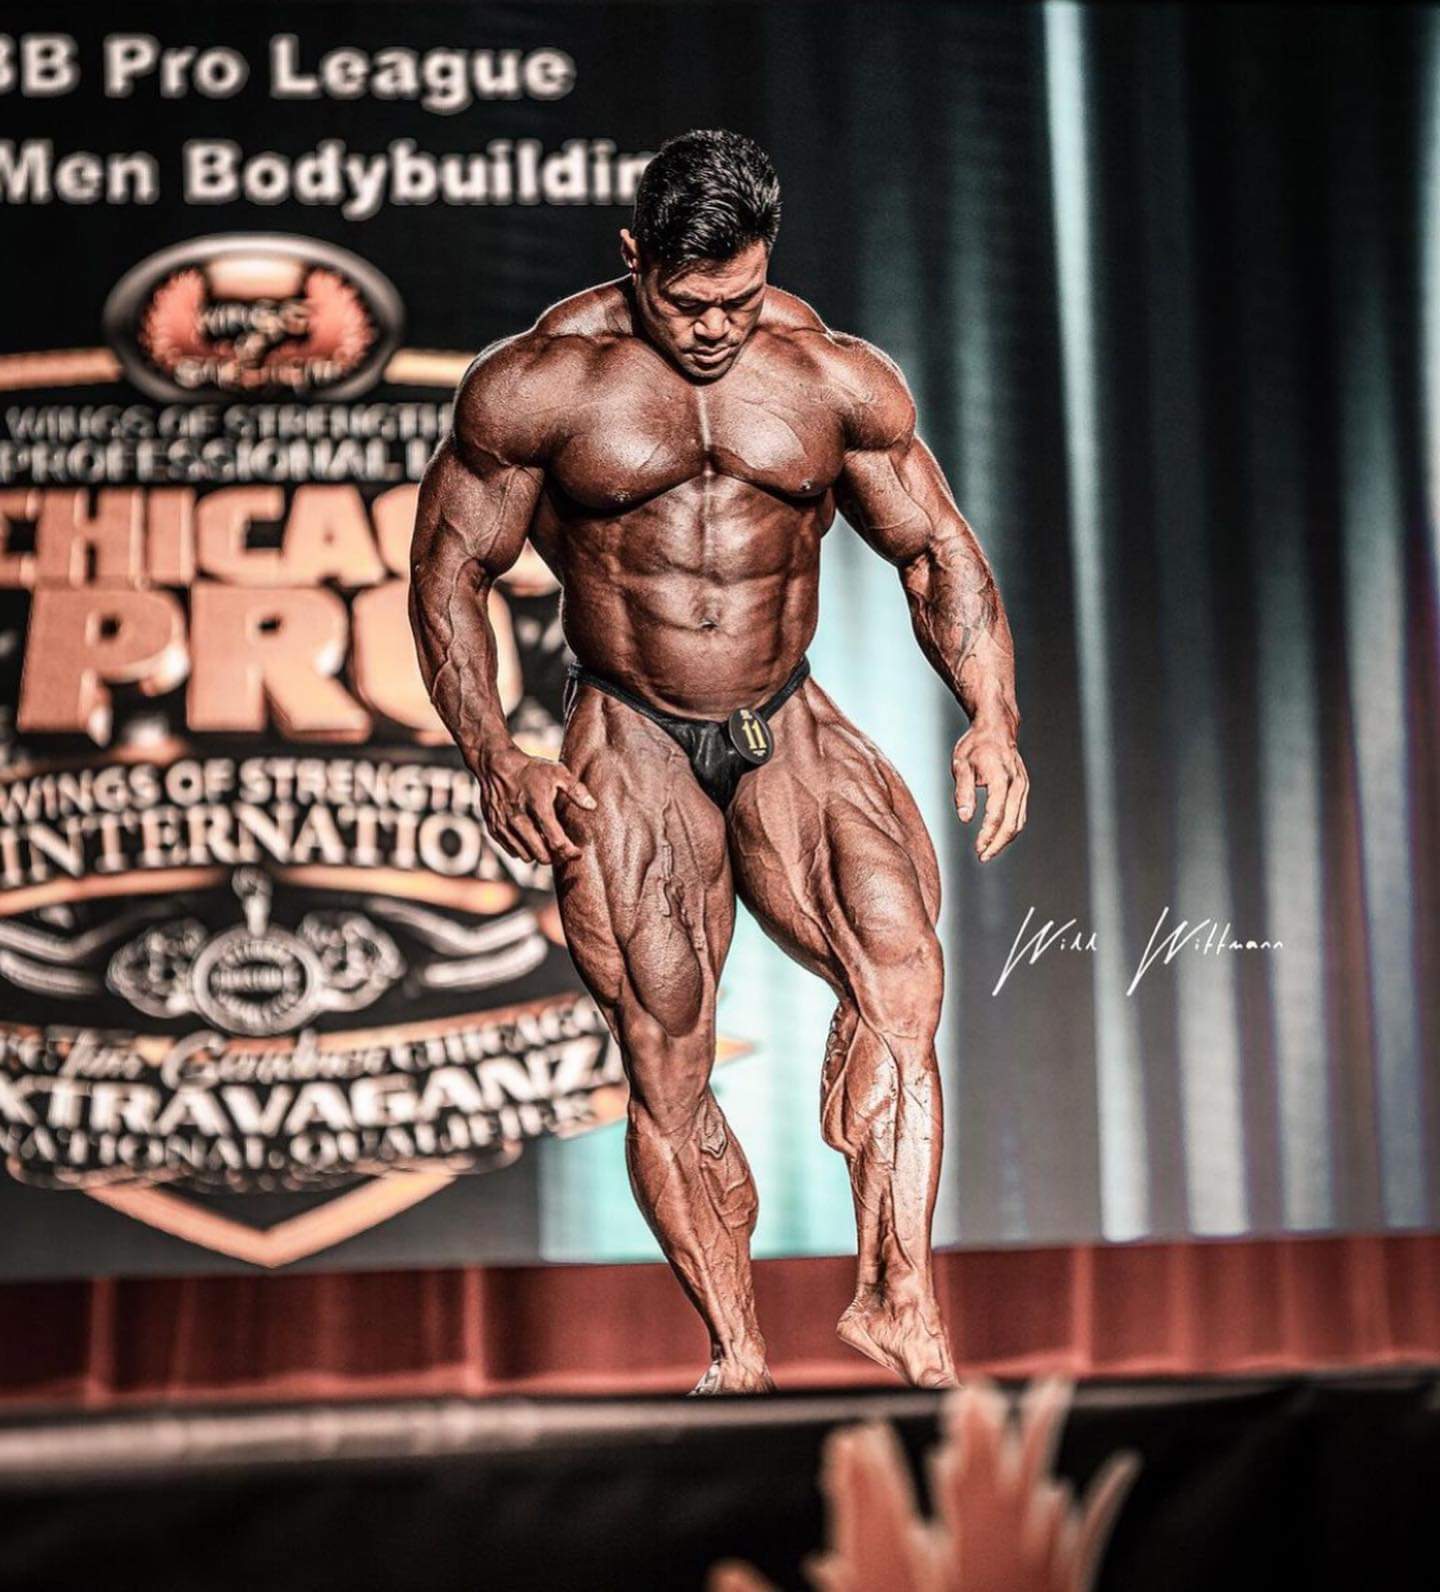 AN NGUYEN sul palco del chicago pro ifbb 2020